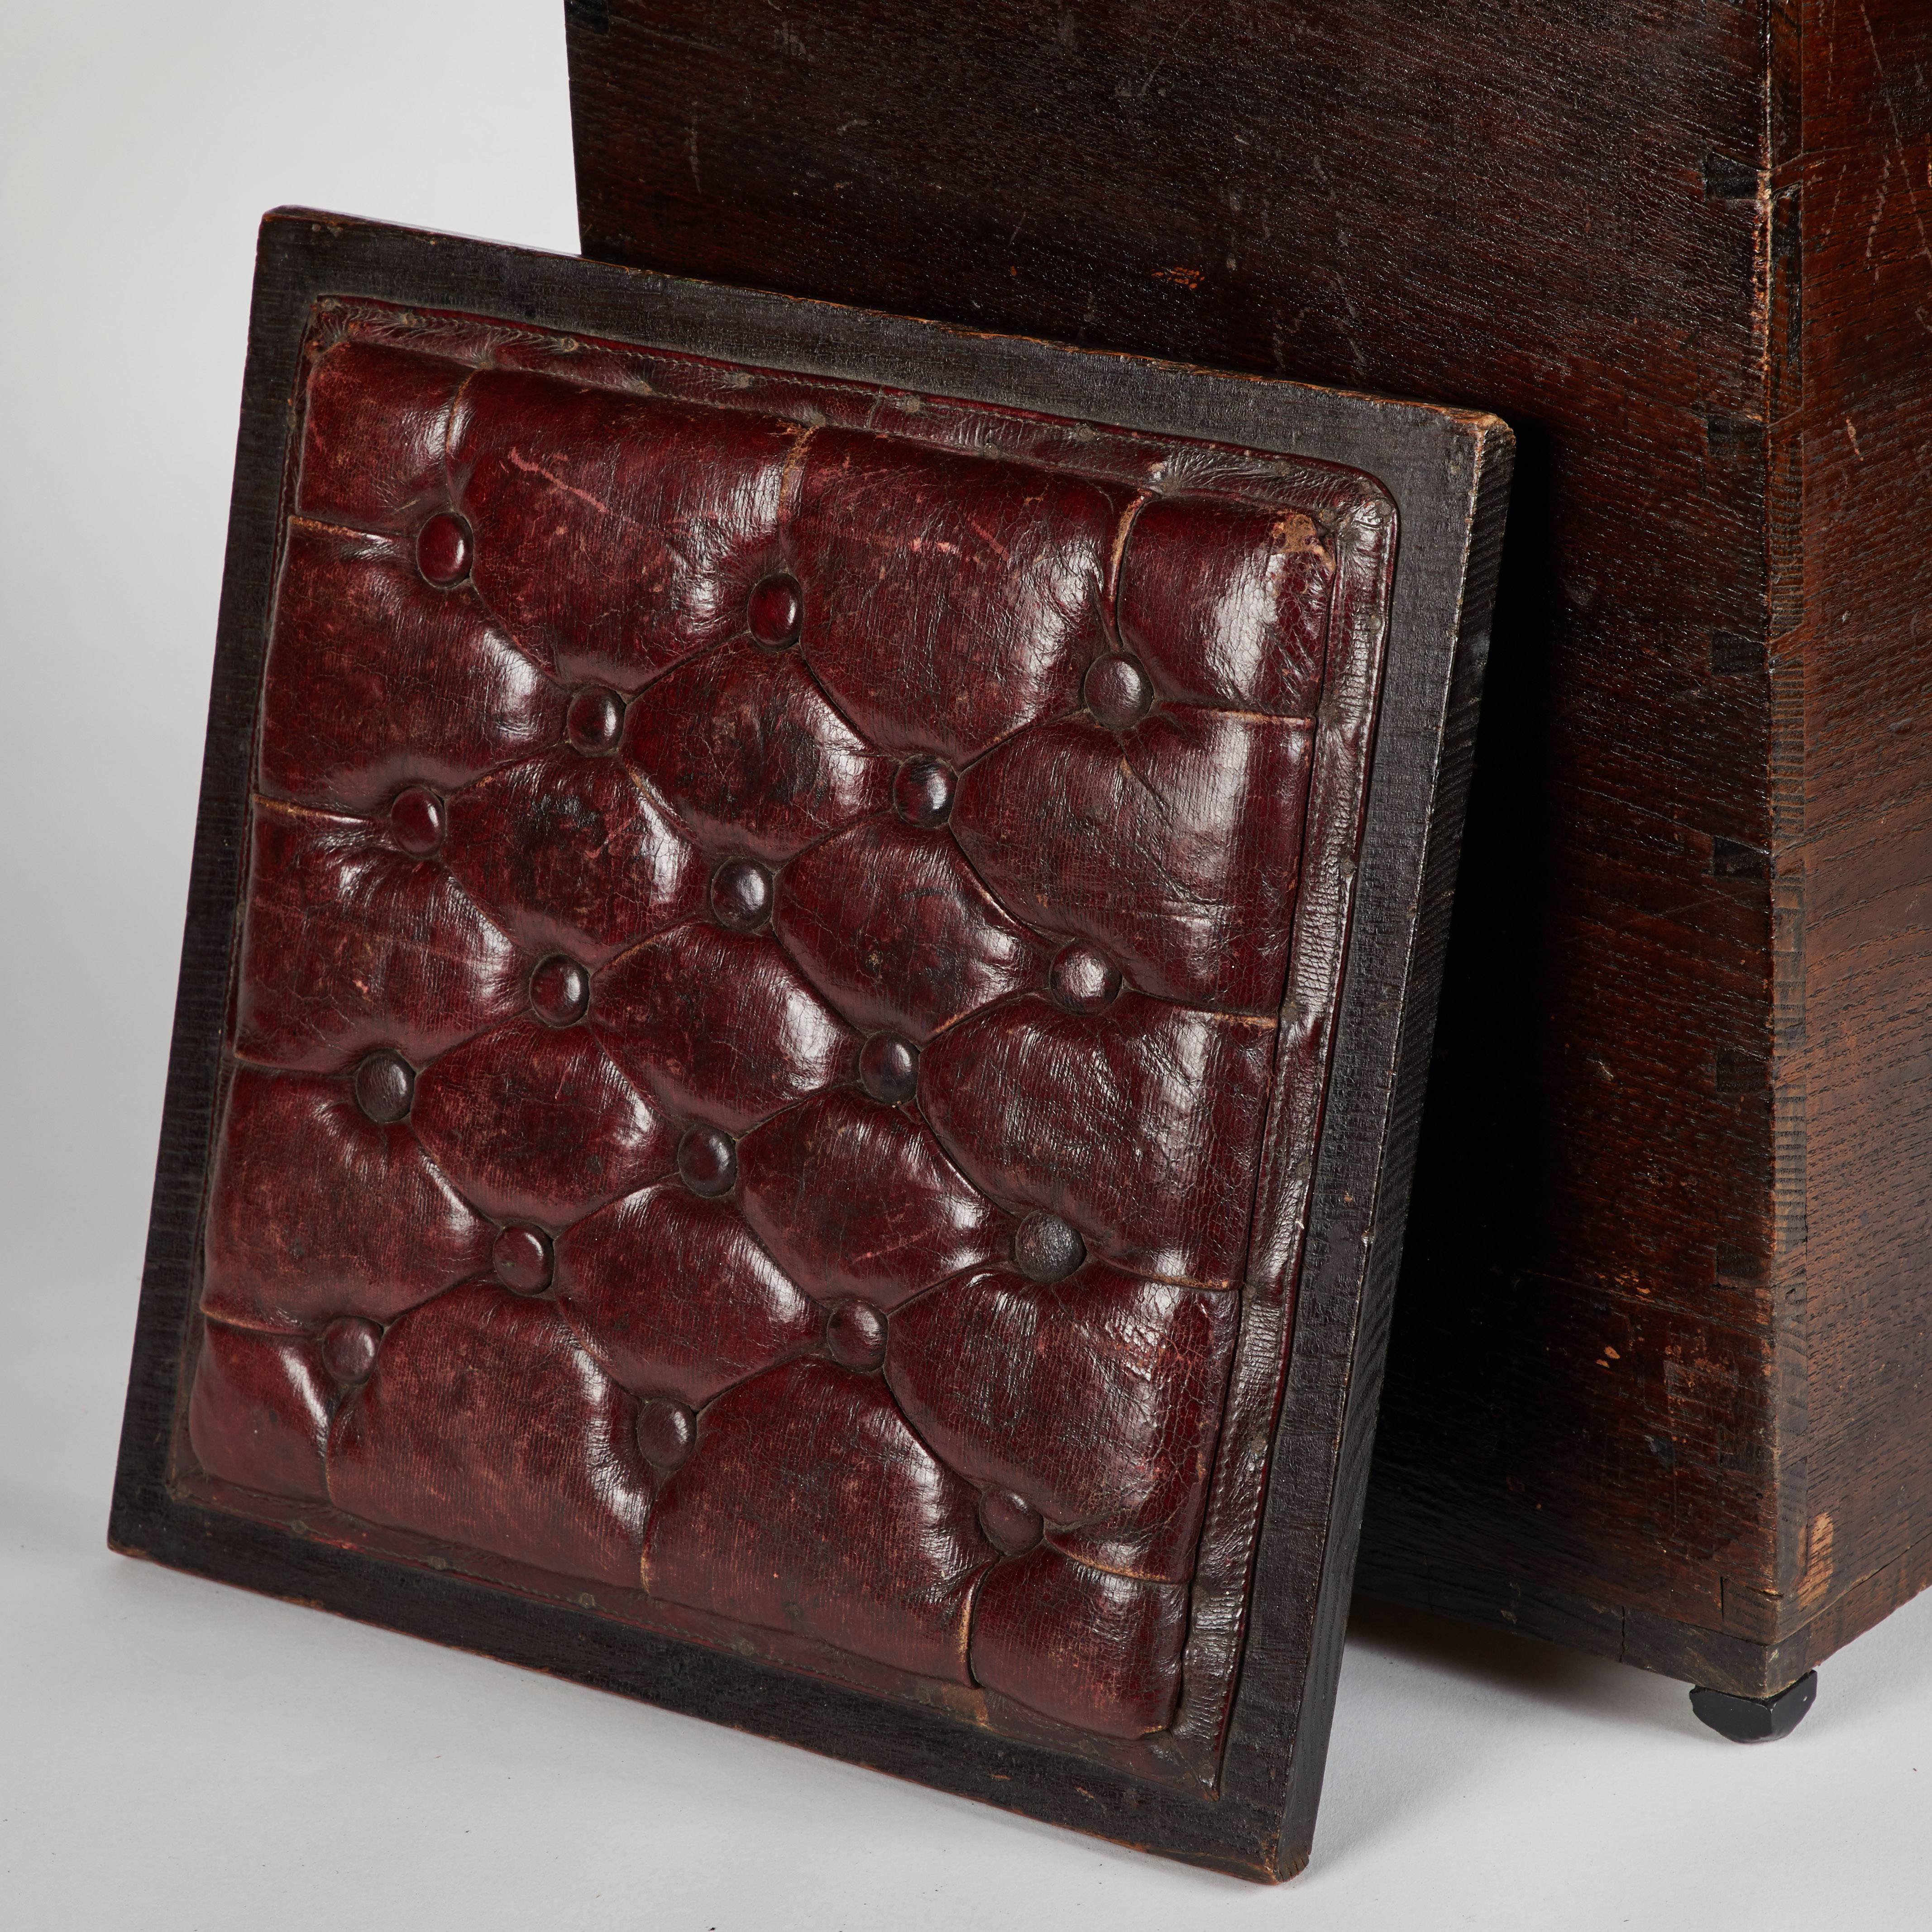 Pair of wood and tufted leather topped stools from late 19th century England. 